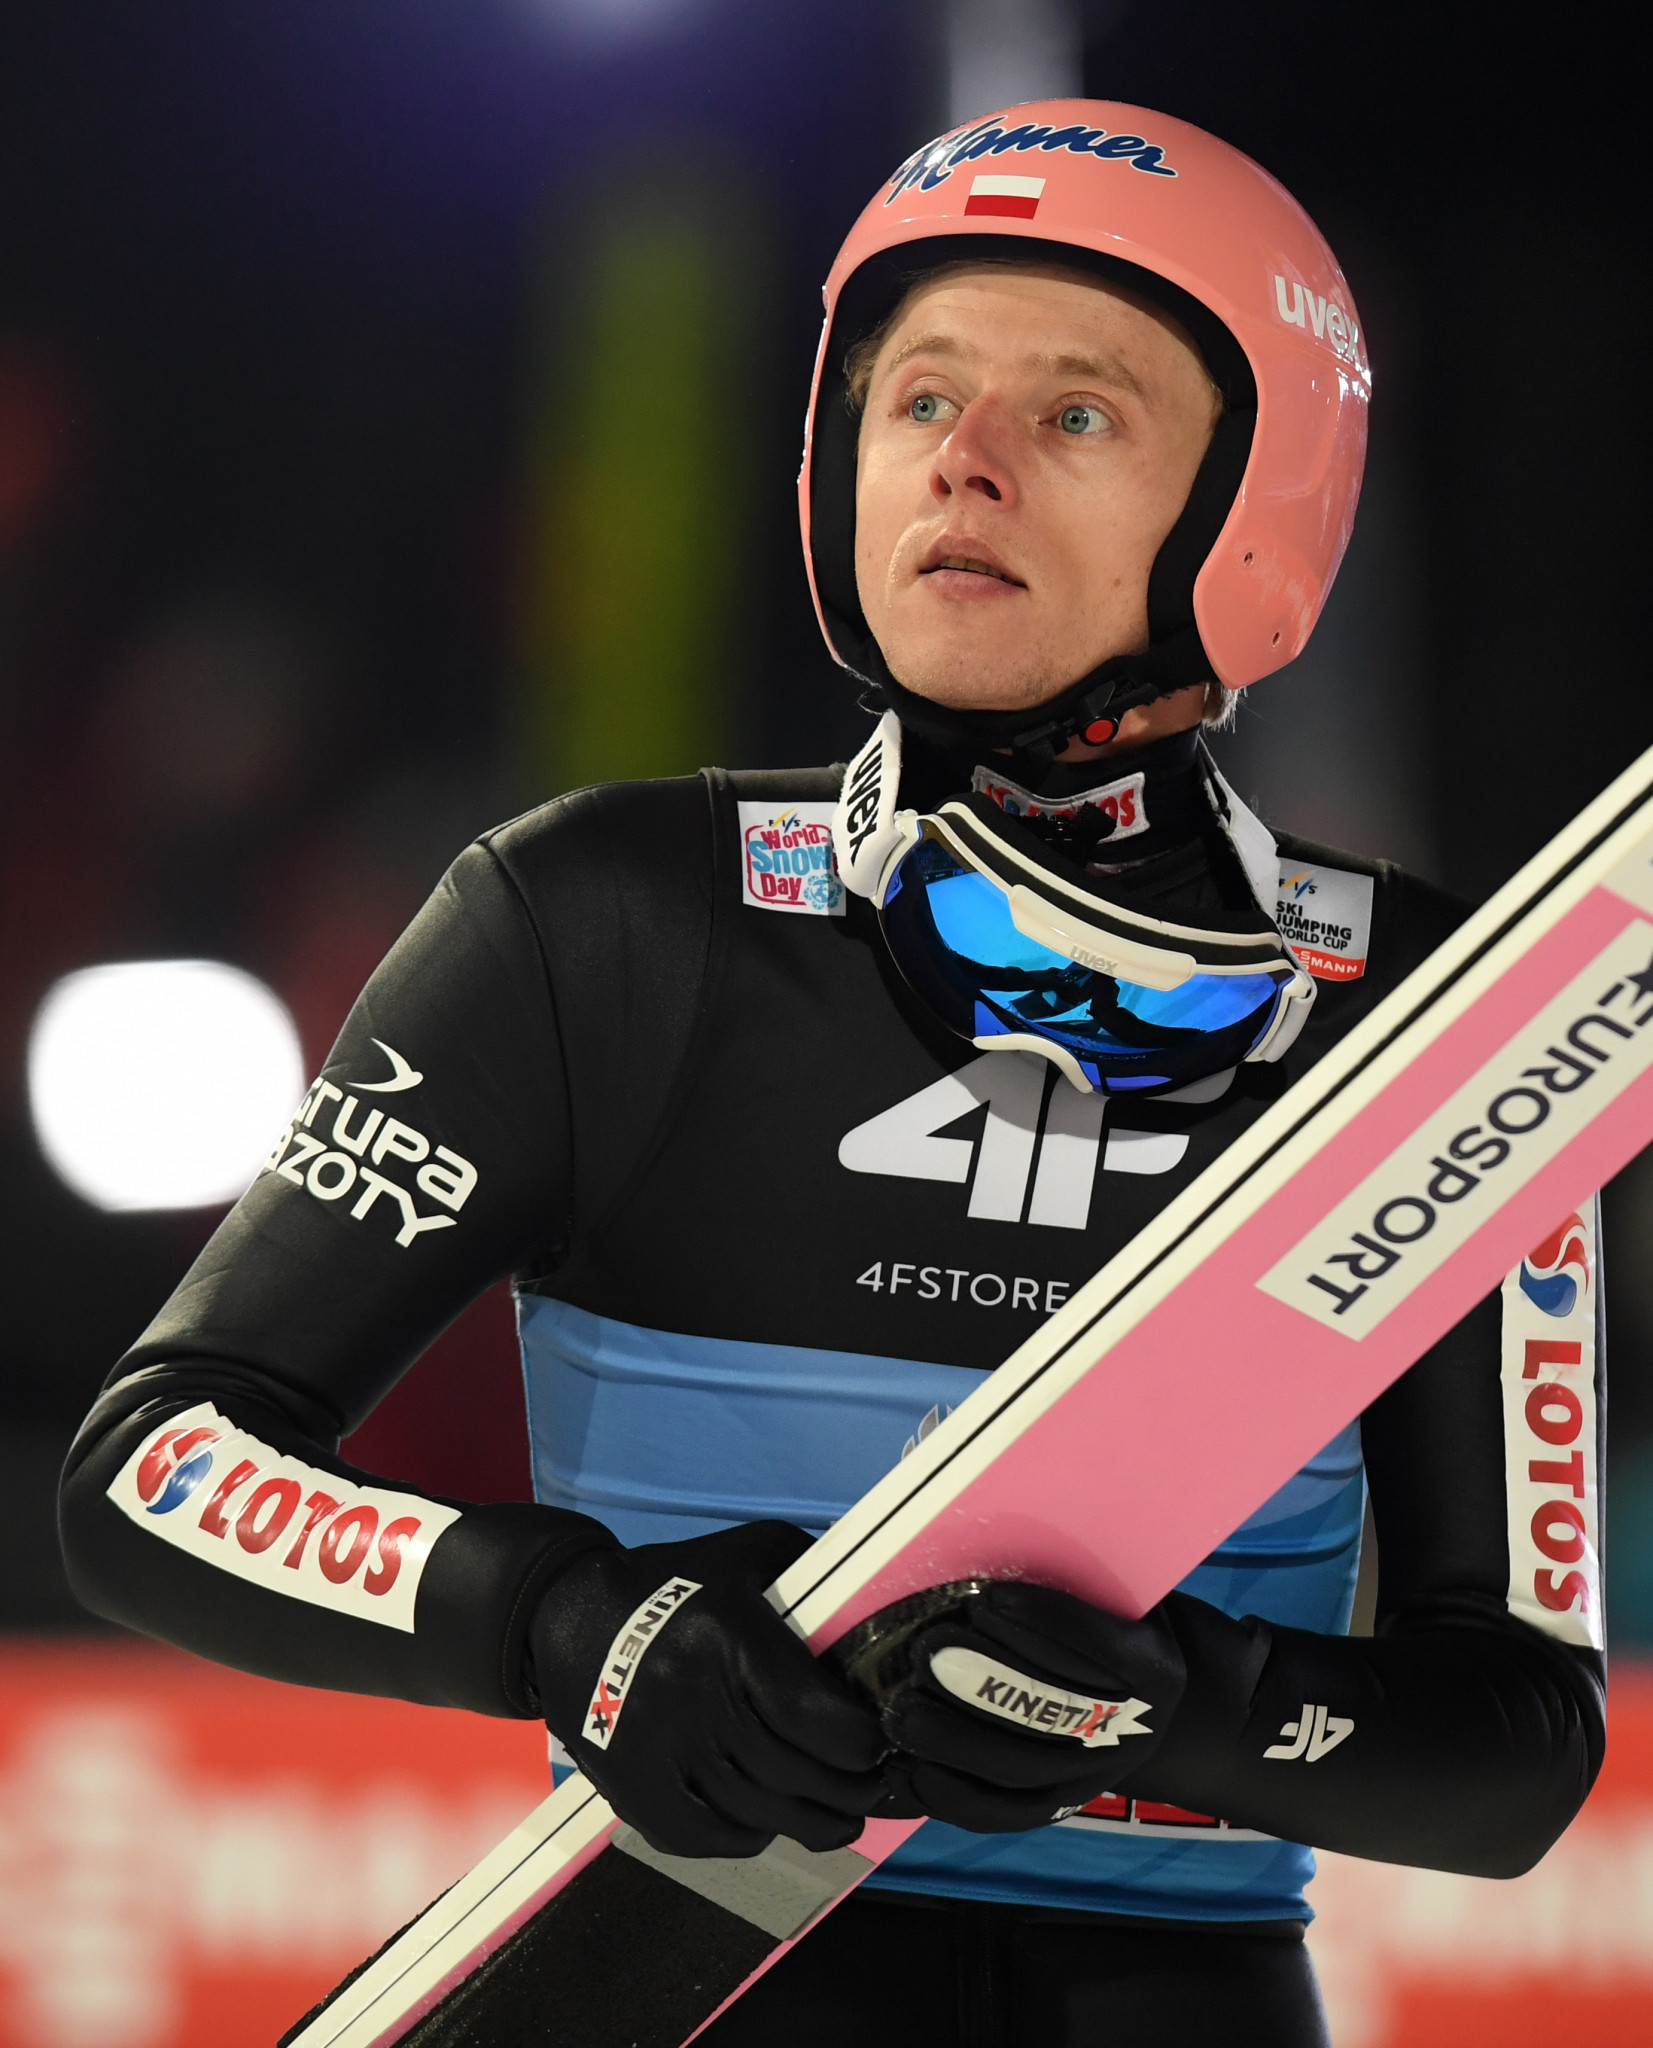 Kubacki set fair to claim Four Hills Tournament title in Bischofshofen after qualifying safely